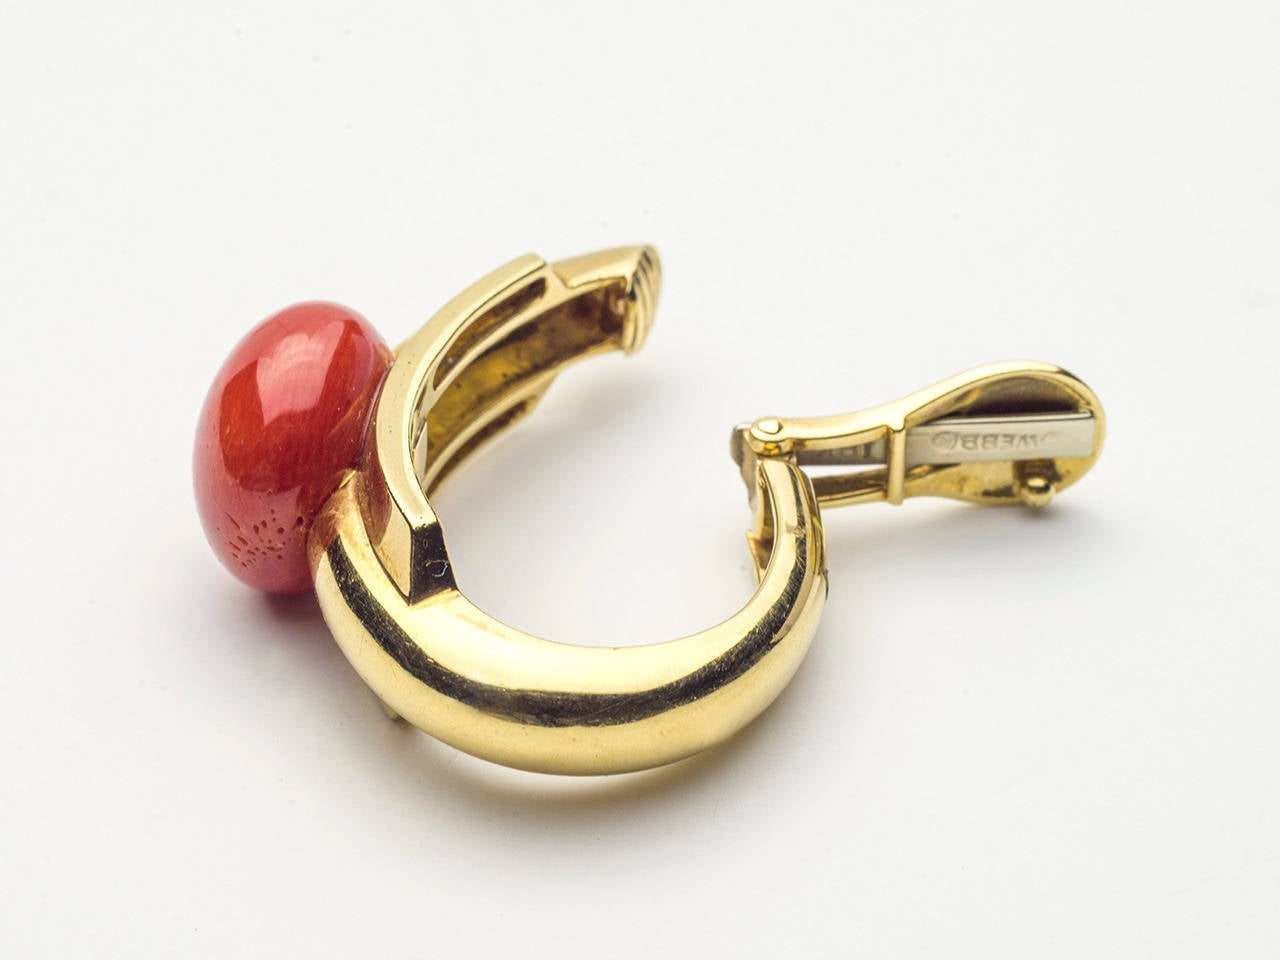 18 K ear hoops set with coral in a beautiful deep red. Signed WEBB 18 K.